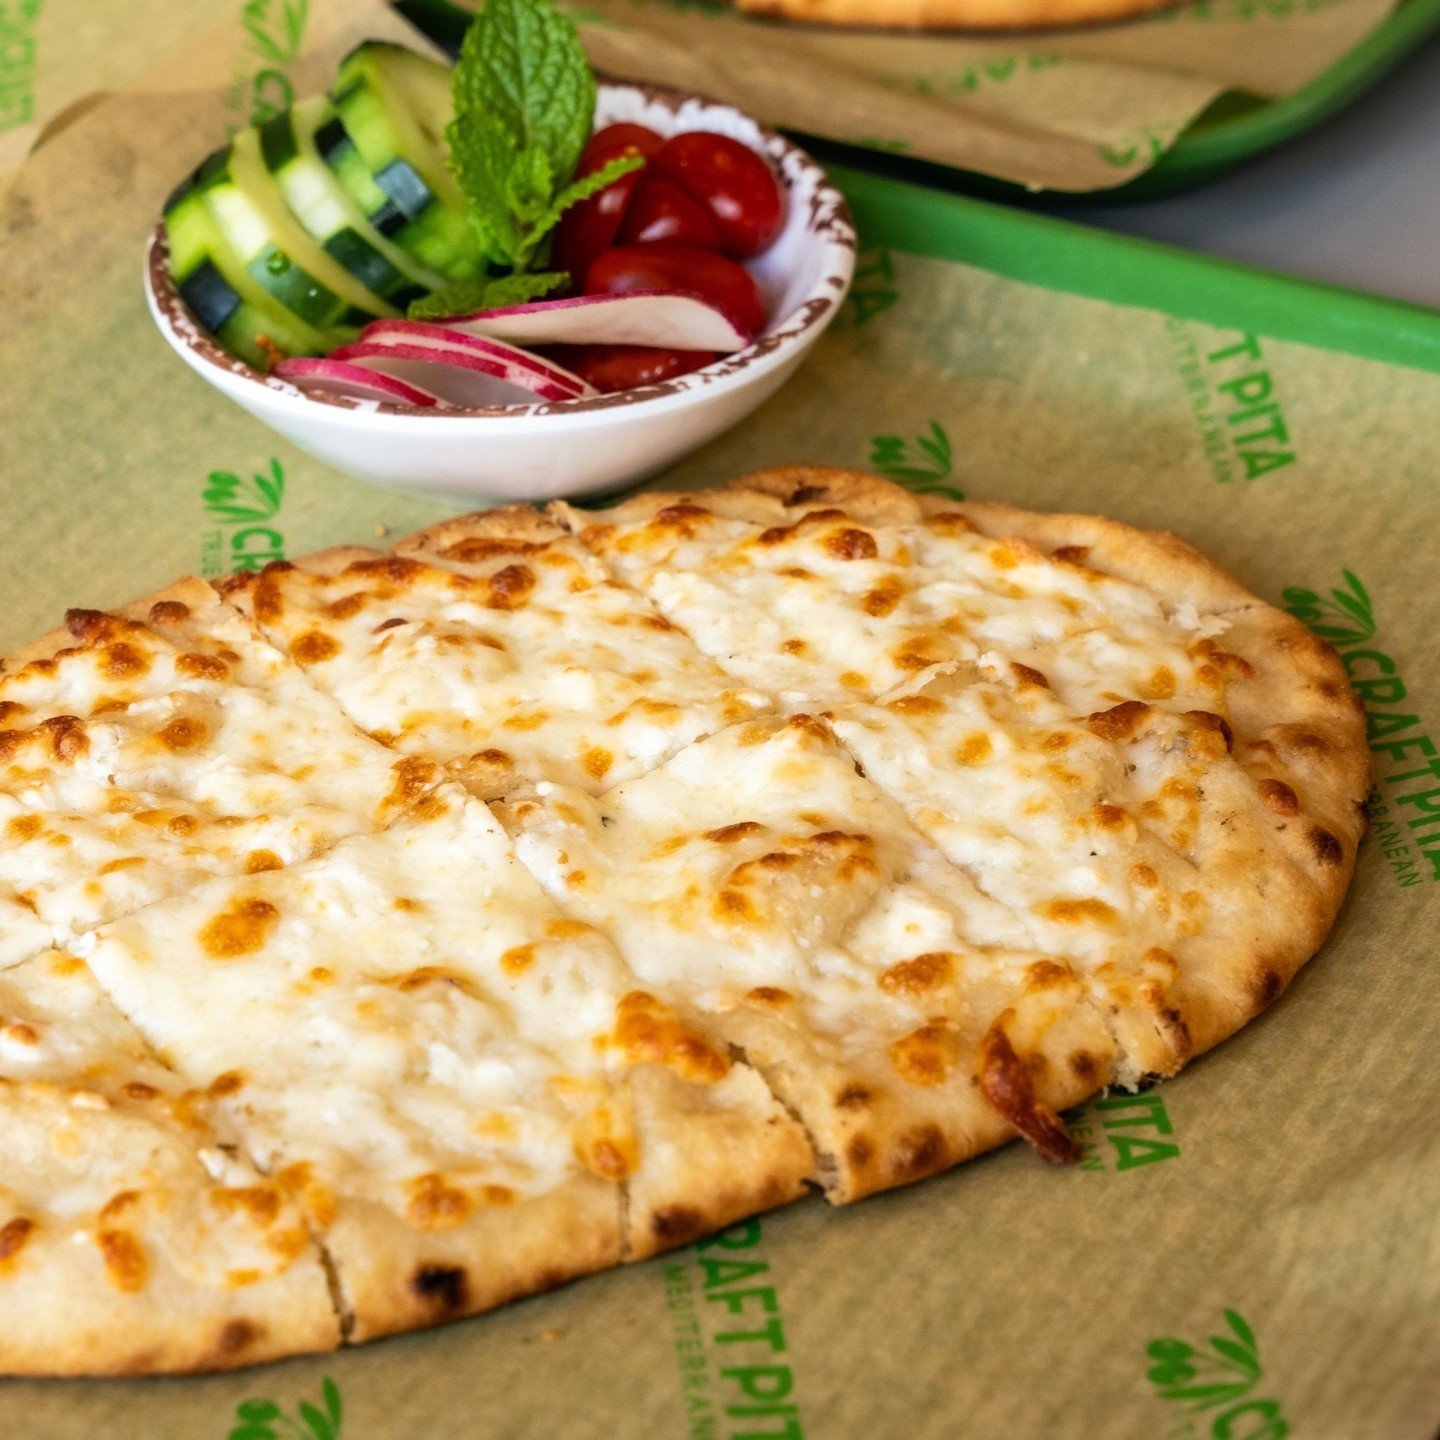 Who doesn&rsquo;t love flatbreads?⁠
⁠
Choose from cheese or zataar or even make it half &amp; half!⁠
⁠
Perfect to share with your friends 😉⁠
.⁠
.⁠
.⁠
.⁠
.⁠
#flatbreads #zataar #houston #houstonfood #picoftheday #delicious #foodlover #timetoeat #nomn